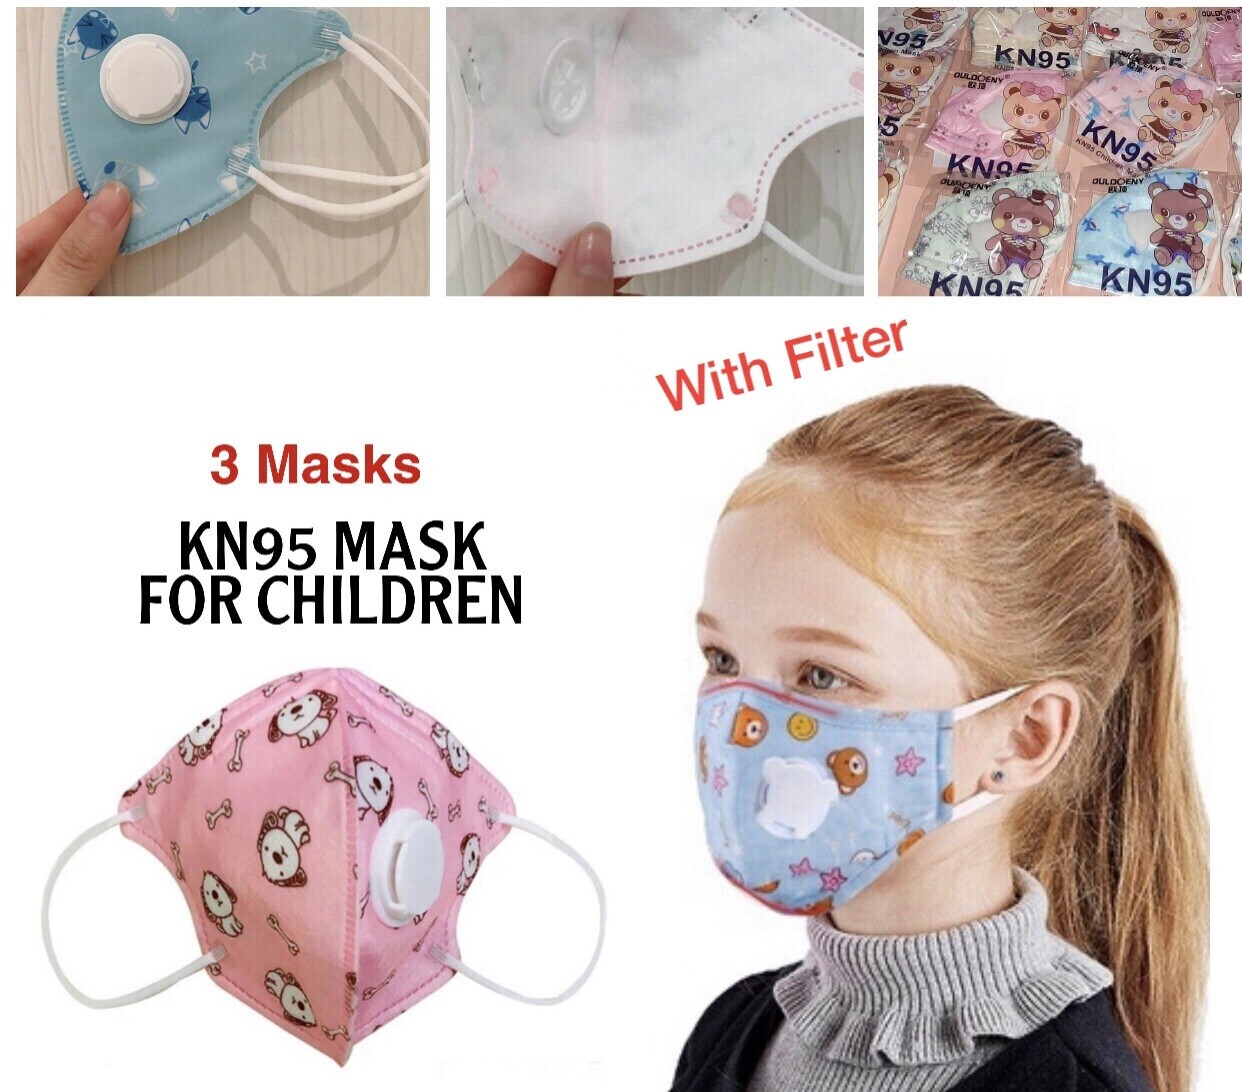 3-Pcs KN95 Children Mask (with filter)